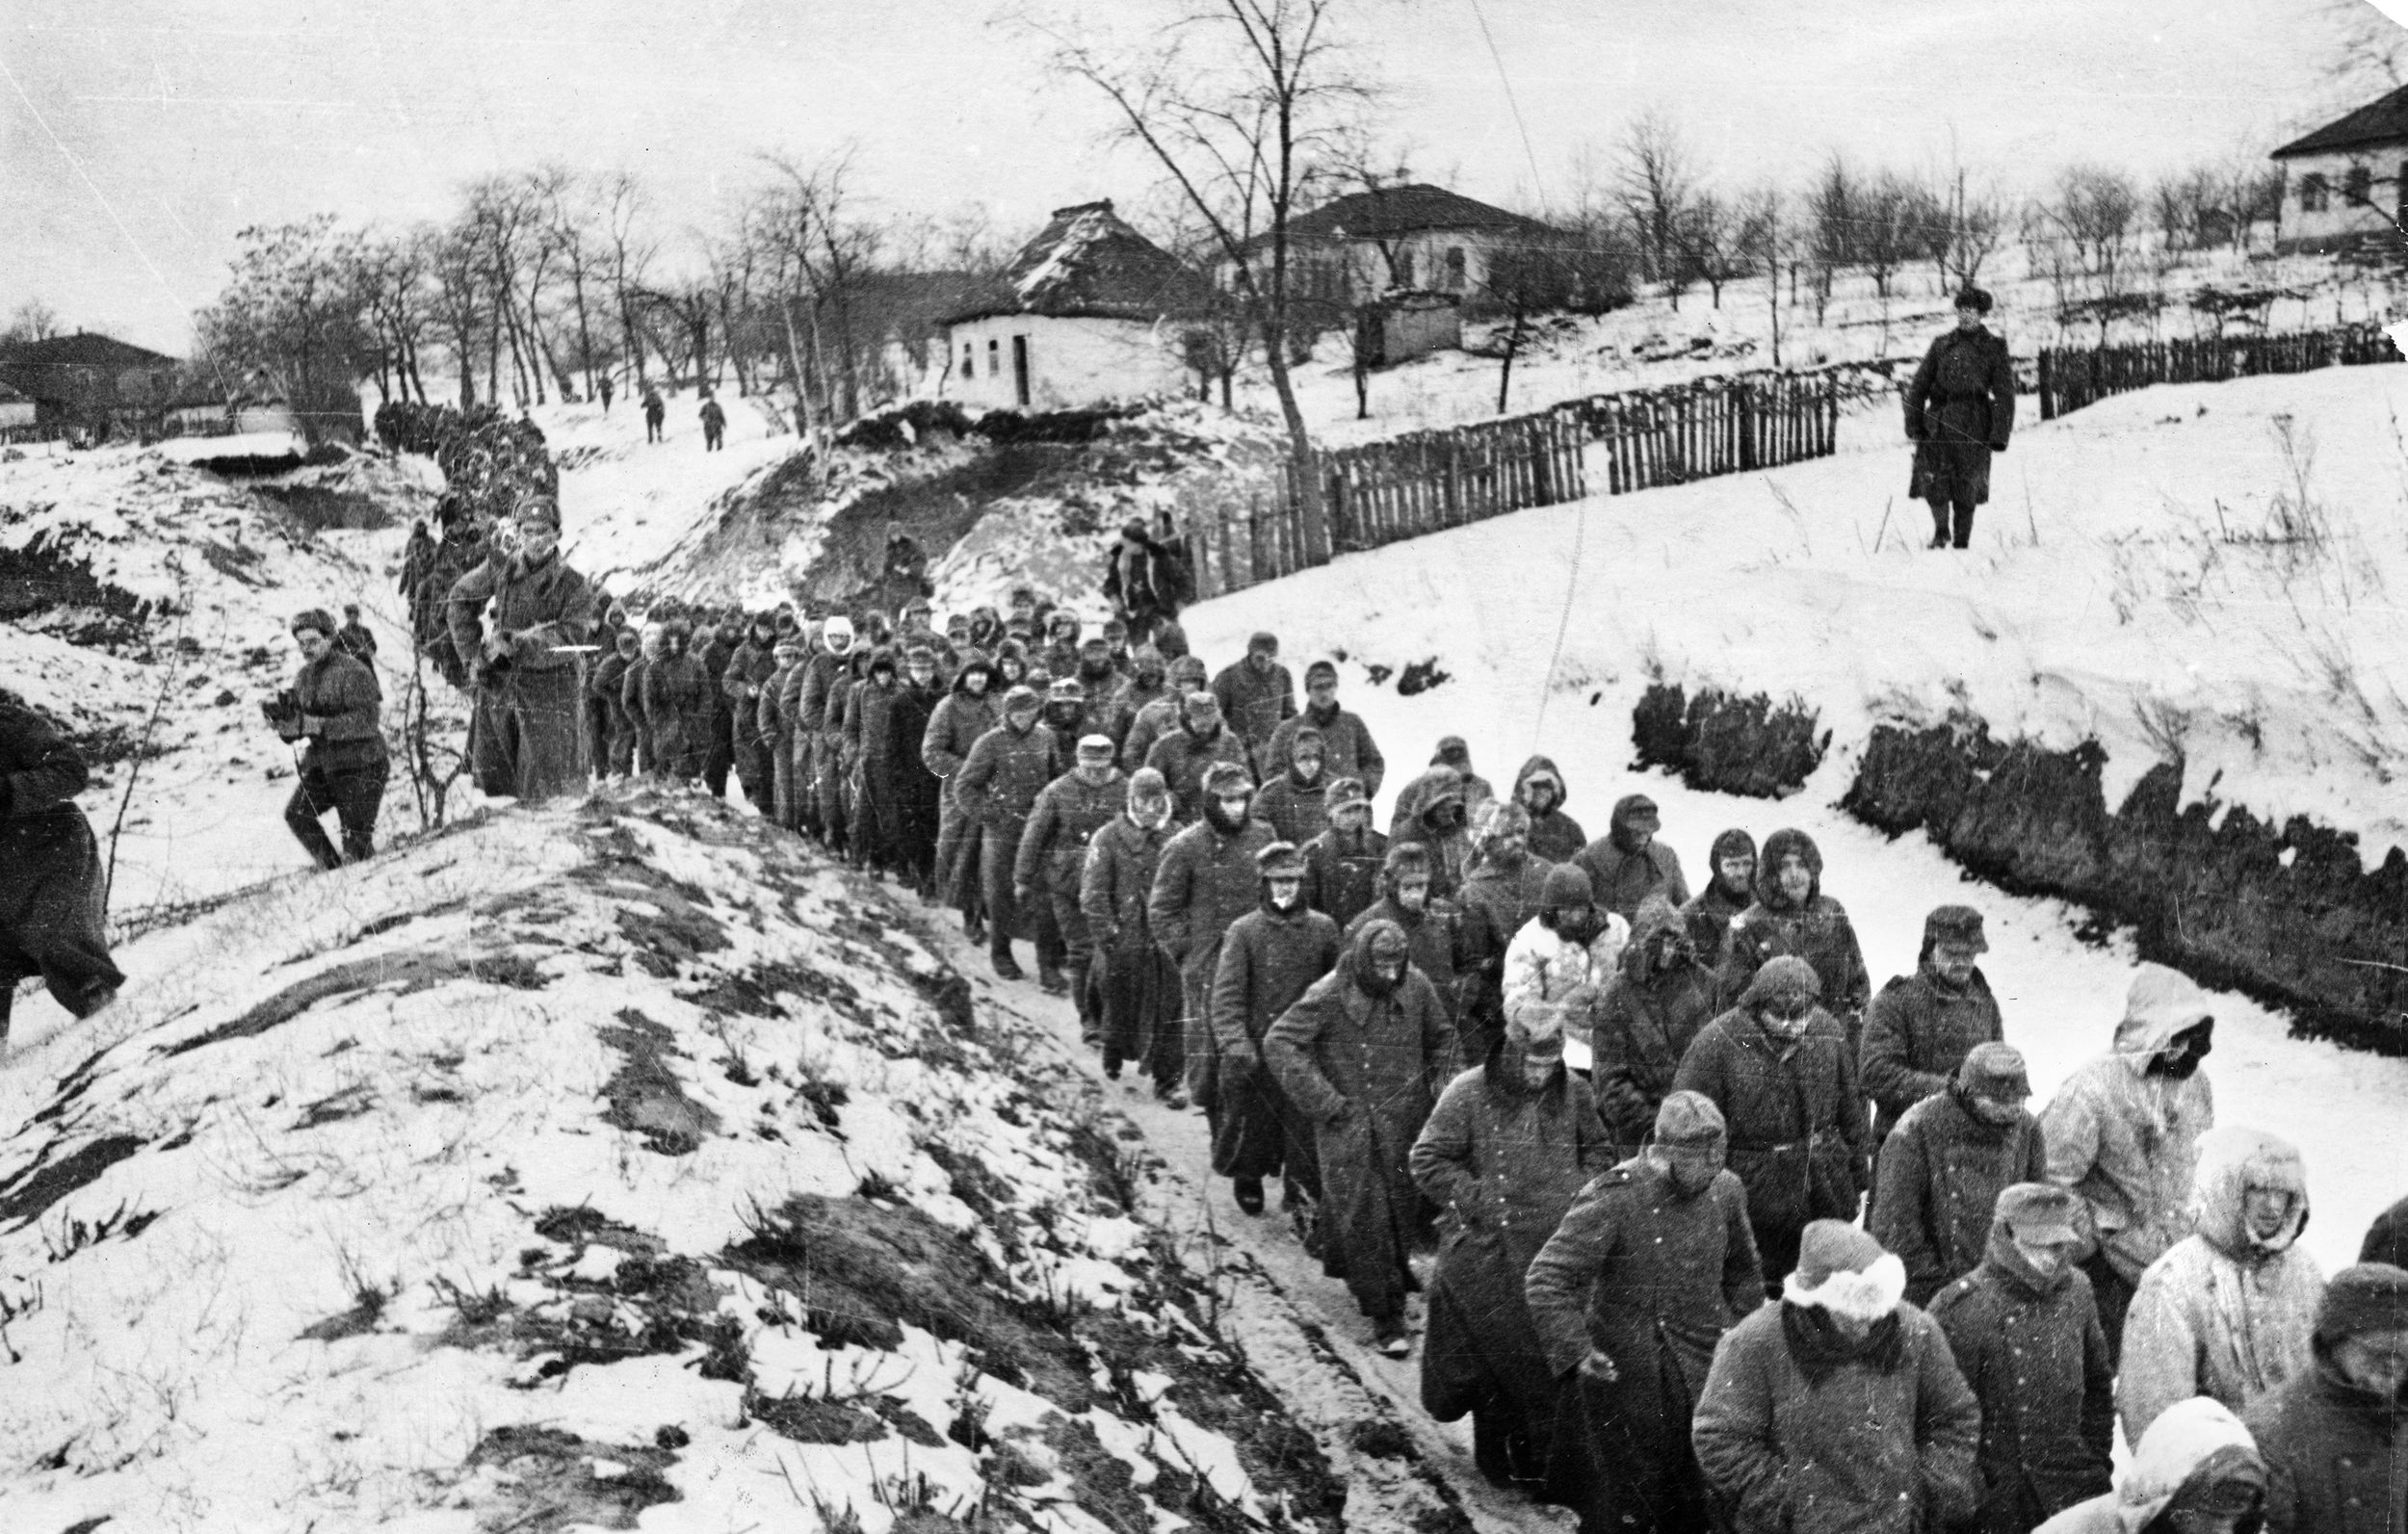 German pows captured during the Battle of the Korsun-Cherkassy Pocket, February 1944. Of the 59,000 men caught in the pocket, 28,000 soldiers and 1,000 Hiwis escaped. Some 11,000 wounded were evacuated by air during the battle or brought out during the breakout. Nineteen thousand were killed or taken prisoner. 